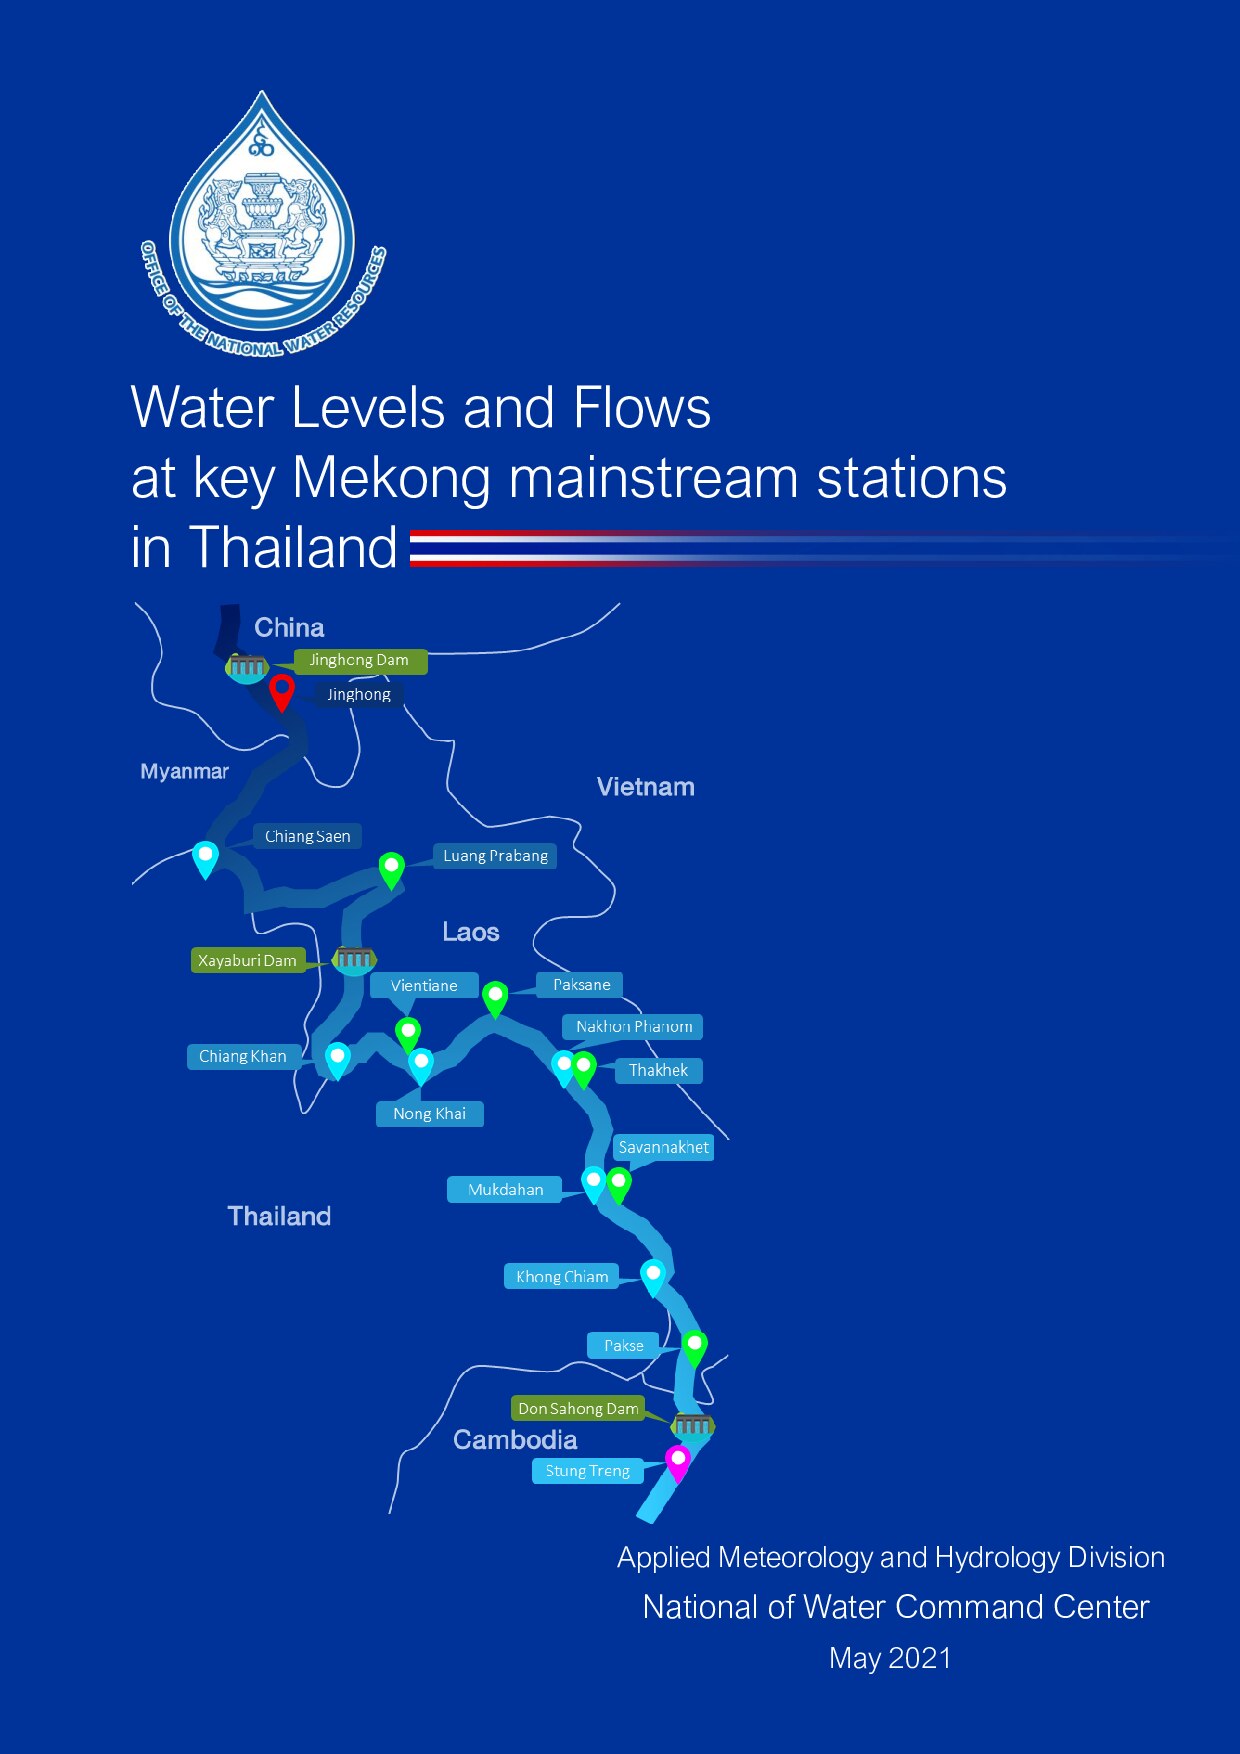 Water Levels and Flows at key Mekong mainstream stations in Thailand